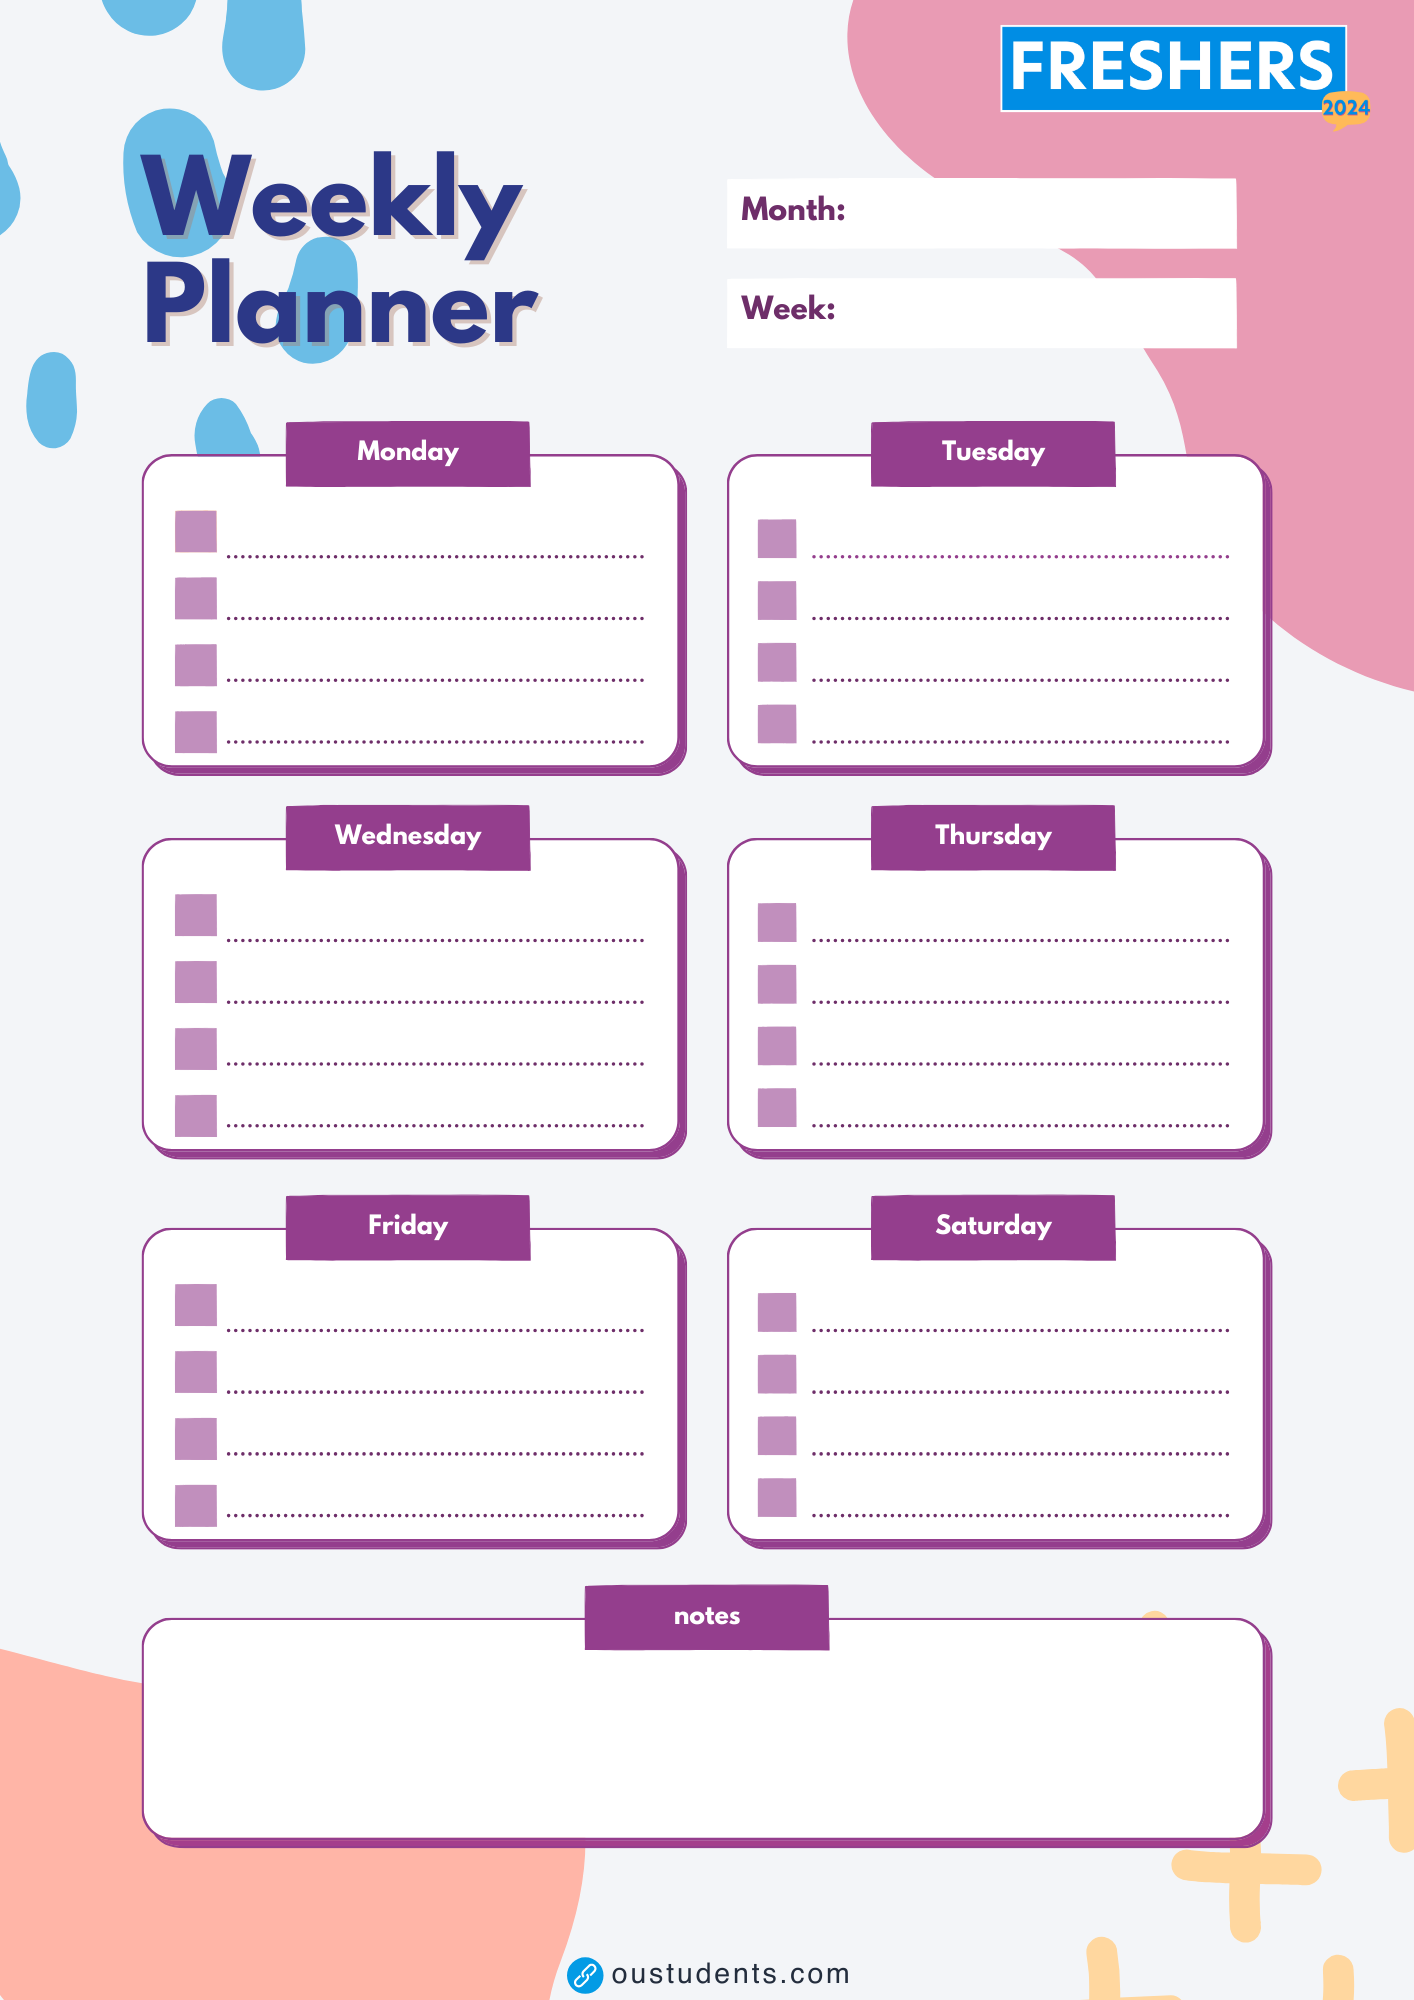 Image shows a weekly planner design with the Freshers 2024 logo in the top left corner